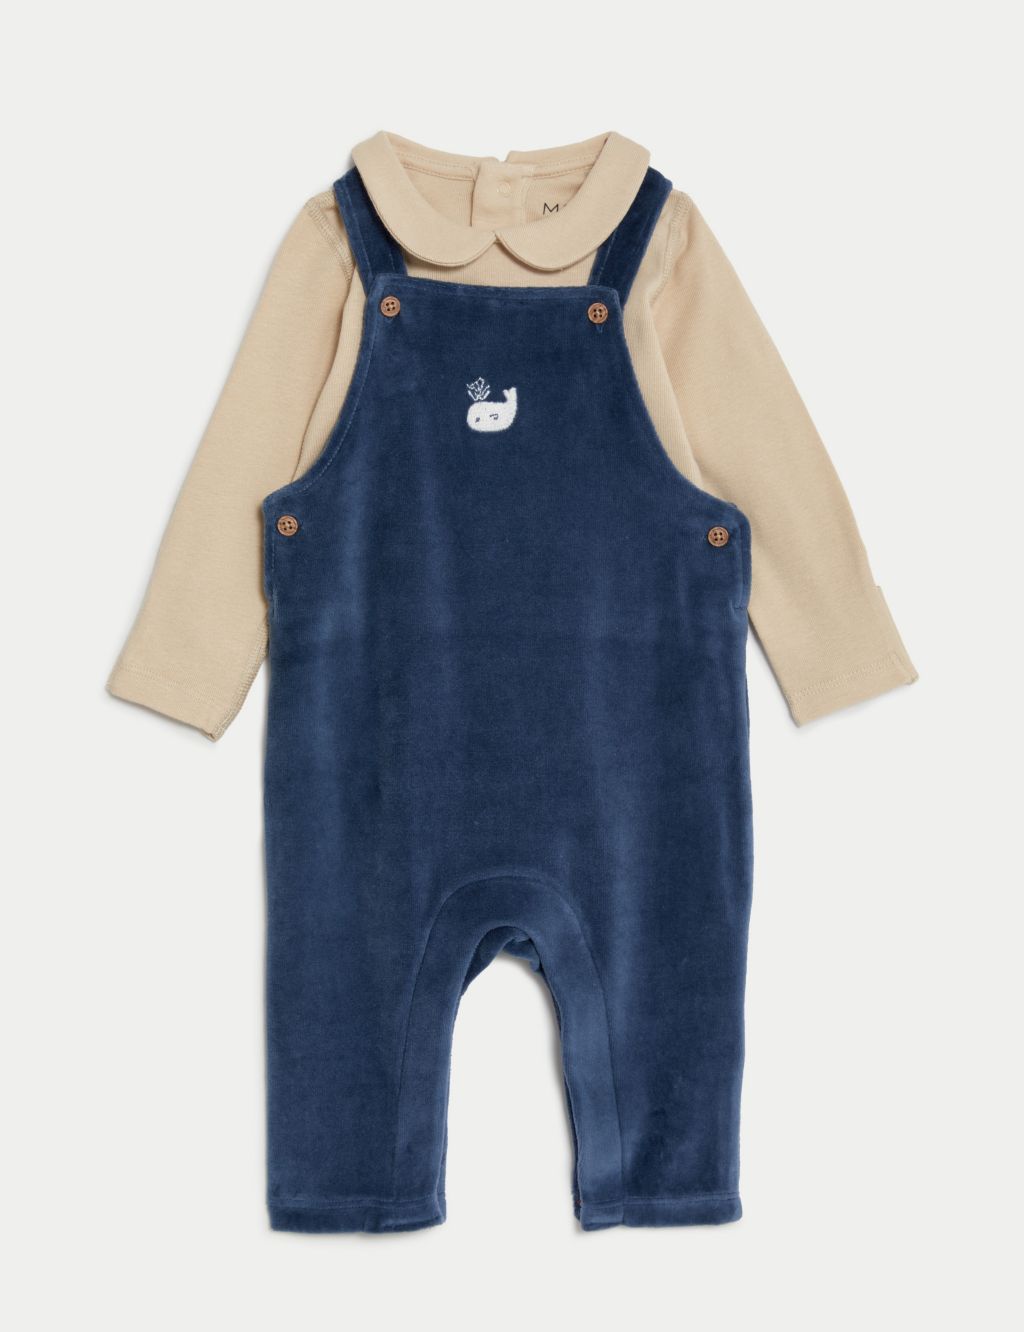 2pc Cotton Rich Whale Outfit (7lbs-1 Yrs) image 2